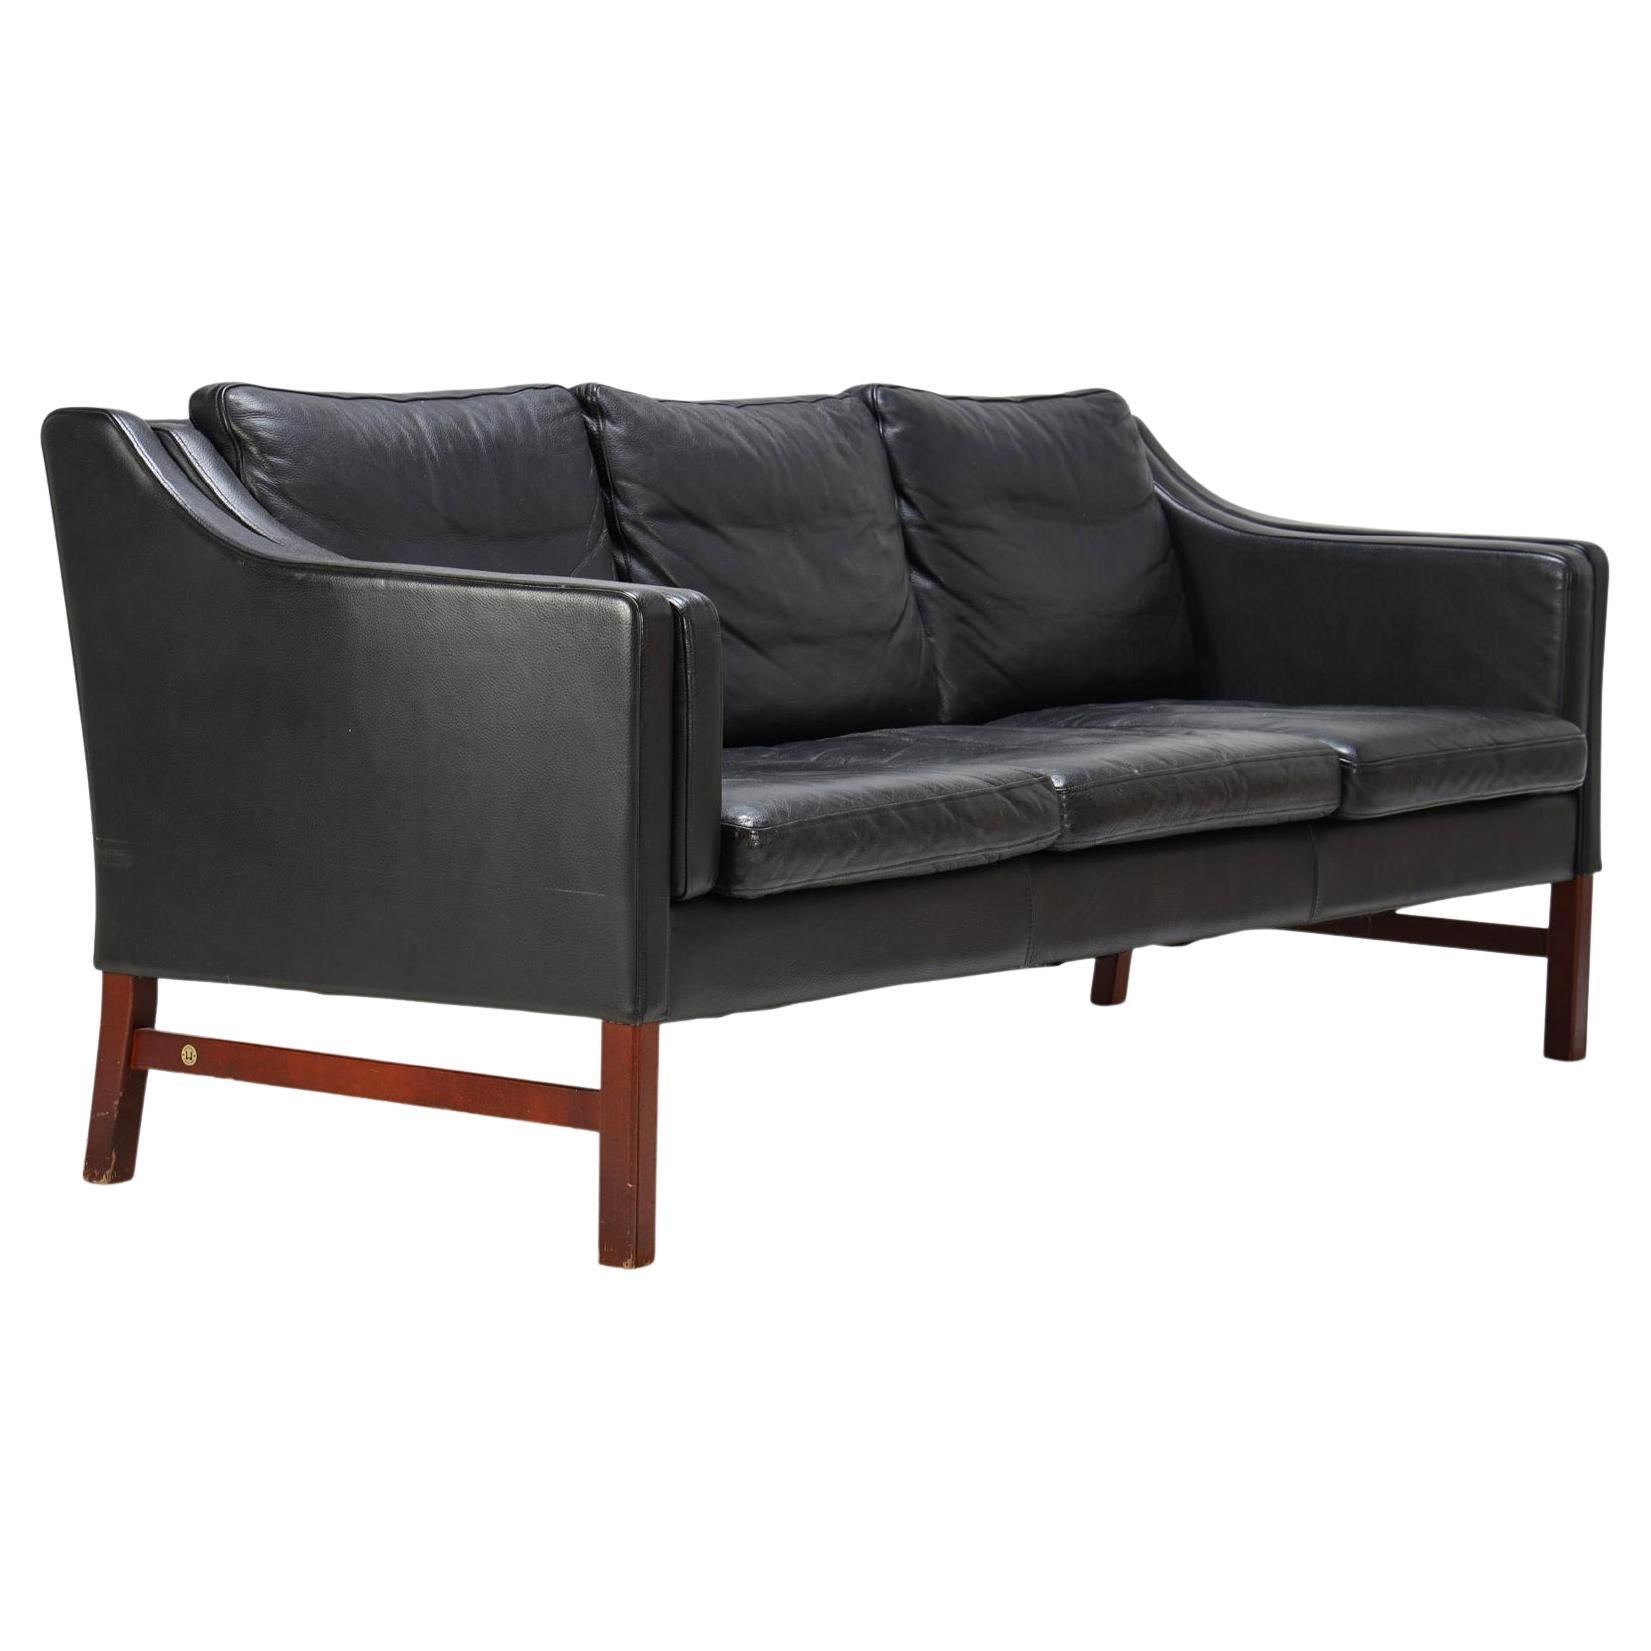 Three Seat Black Leather Sofa by Skippers Møbler